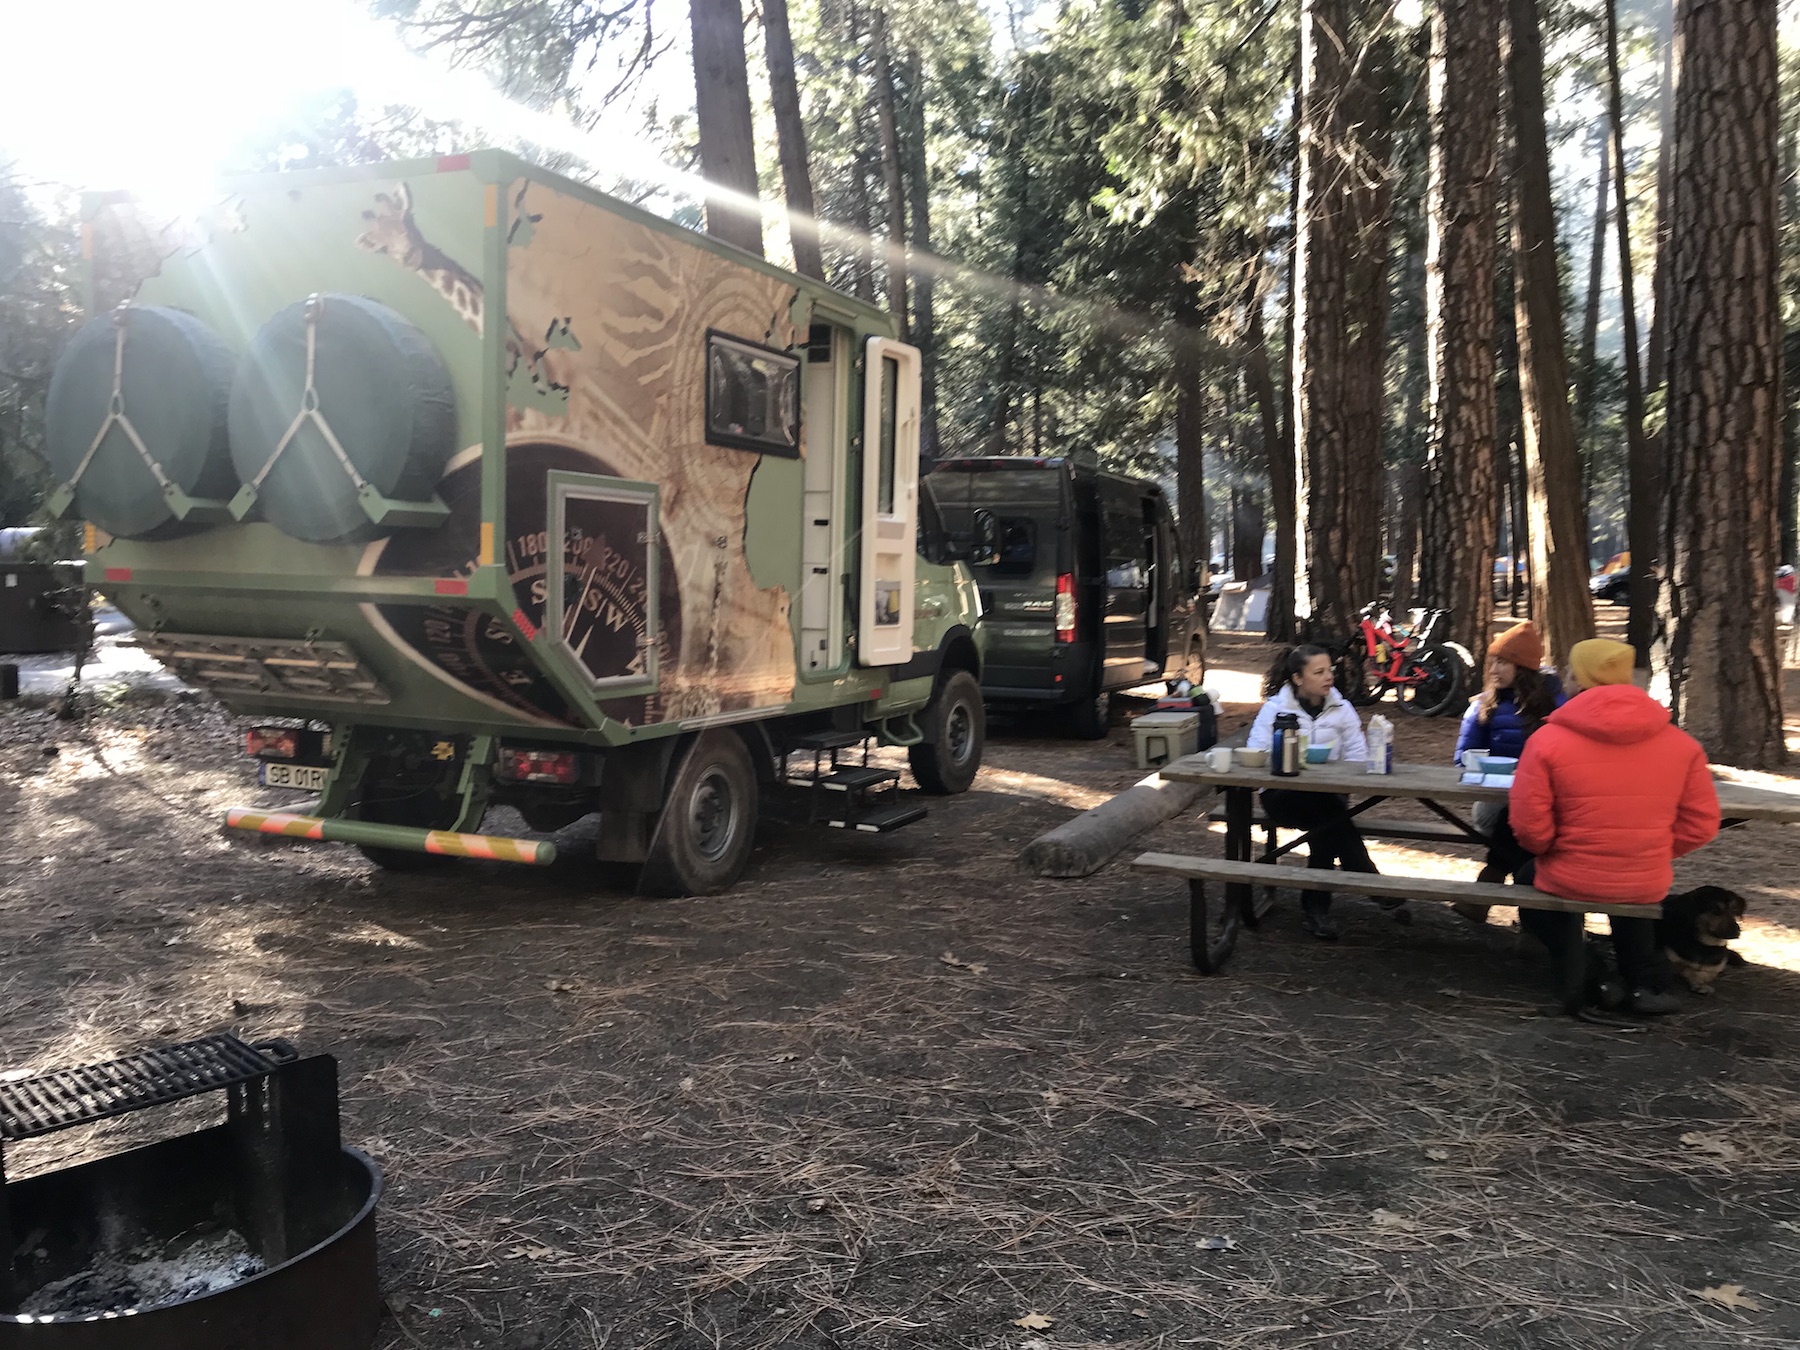 Early lovely breakfast in Yosemite with our new friends :-)